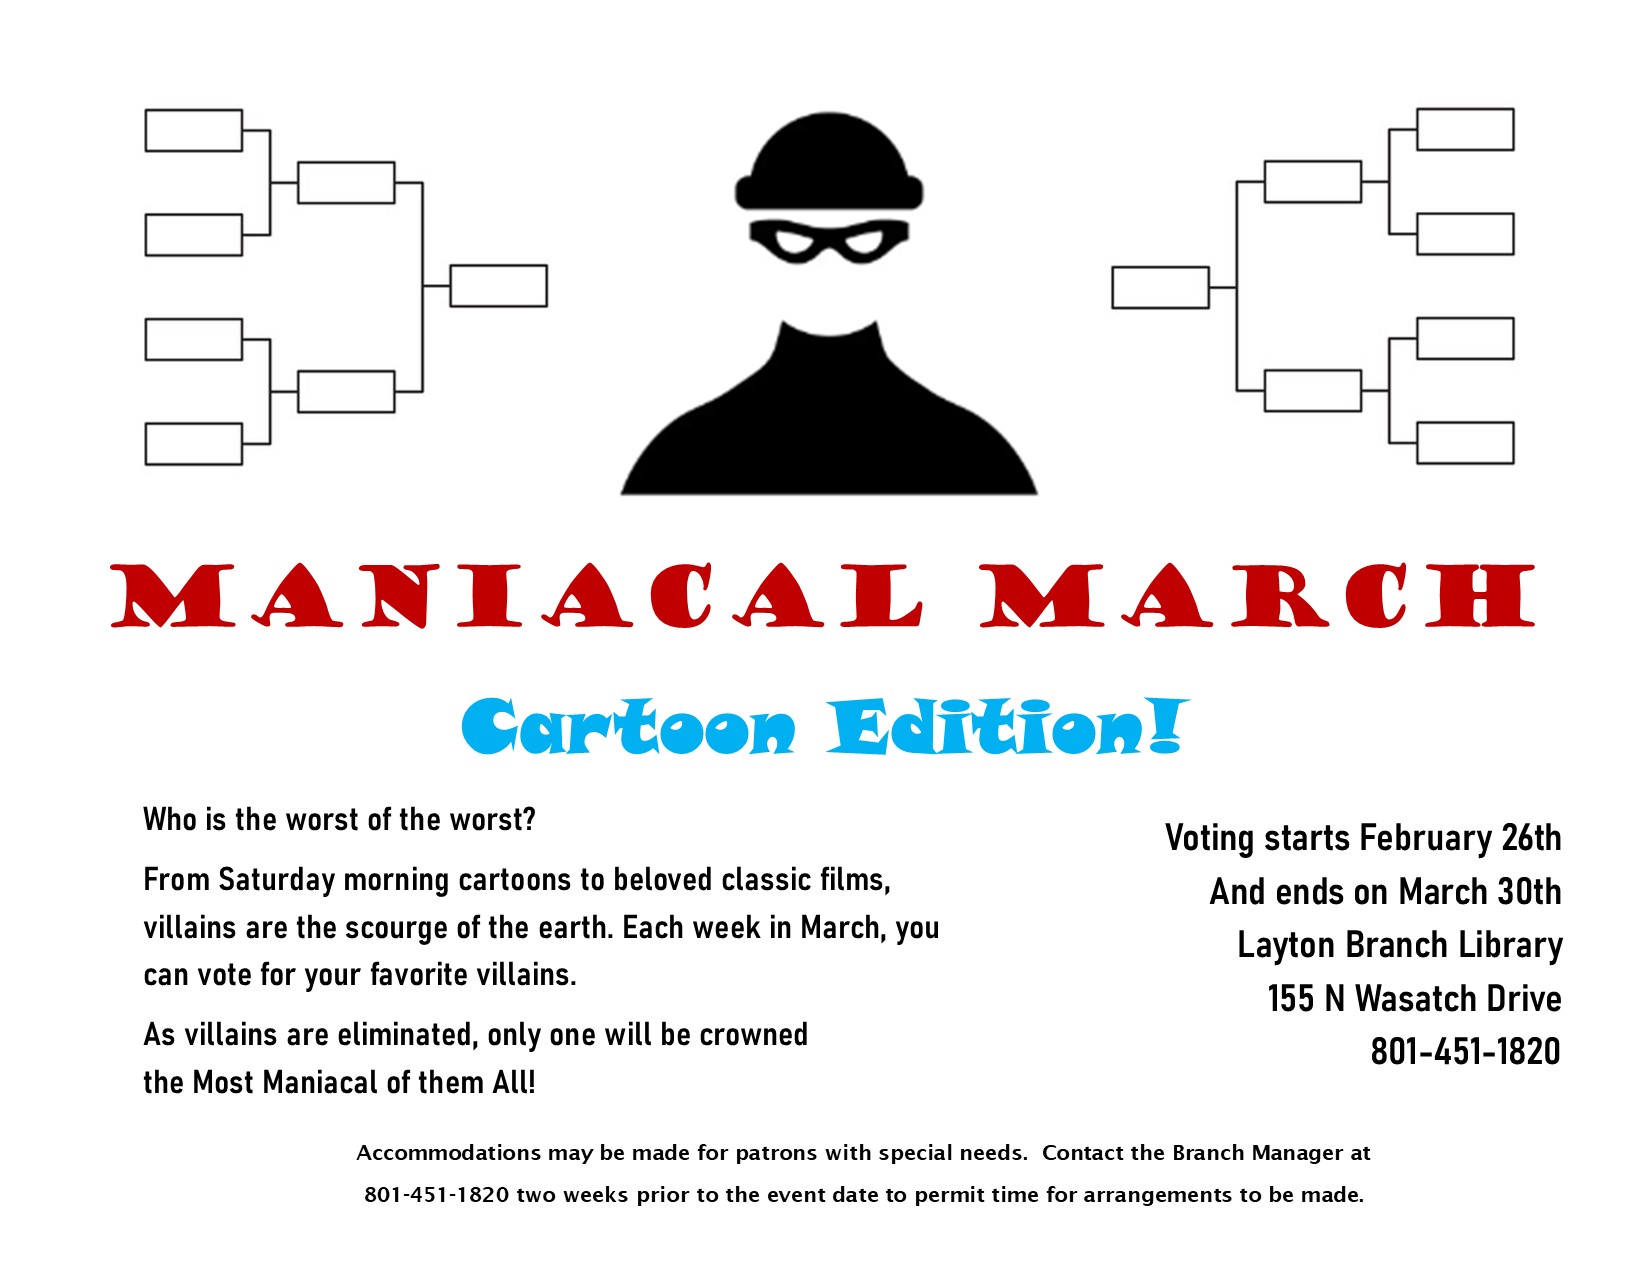 Maniacal March- Vote for your favorite villain from Feb 26 to March 30 at Layton Branch